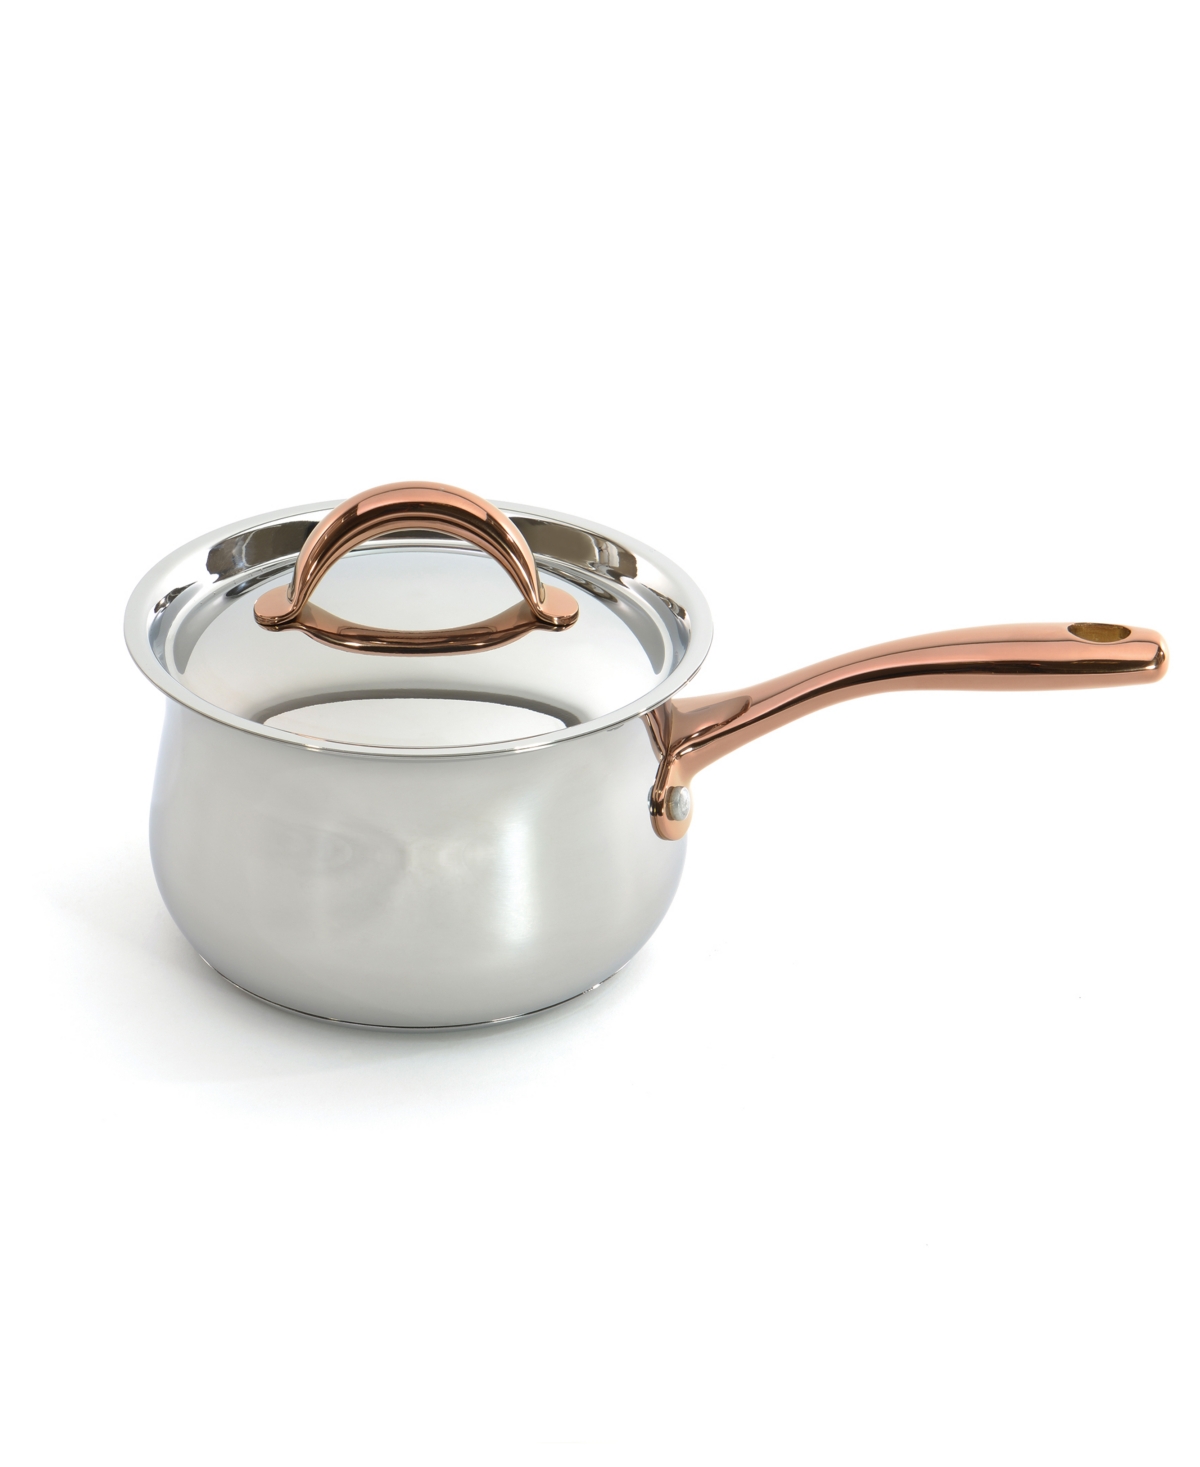 Ouro Stainless Steel 6.25 Covered Saucepan